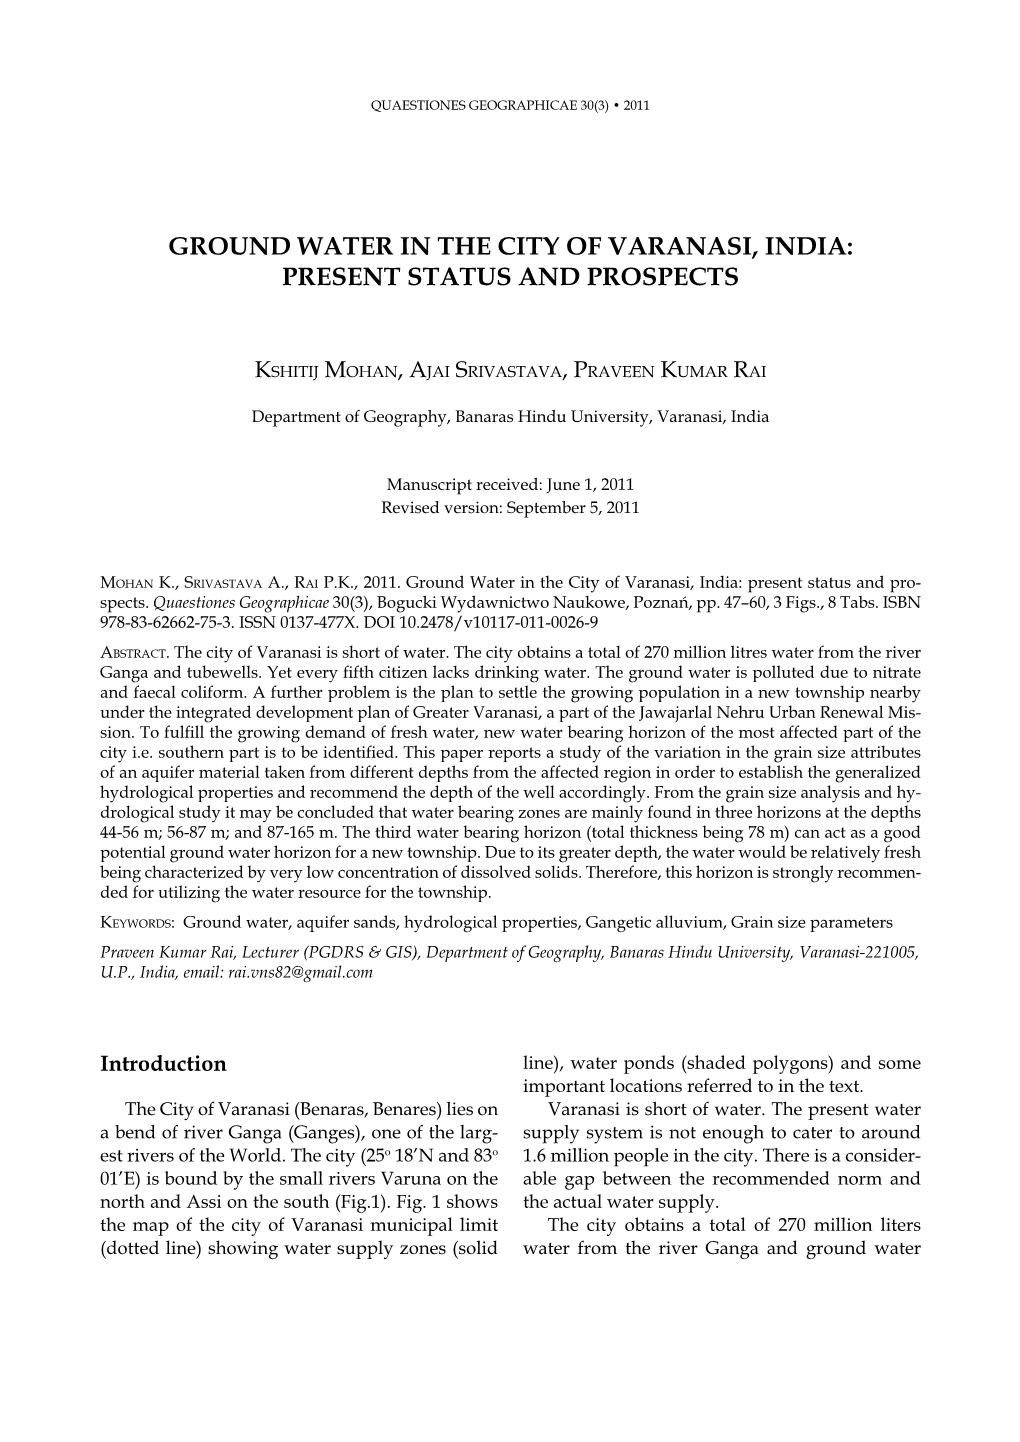 Ground Water in the City of Varanasi, India: Present Status and Prospects